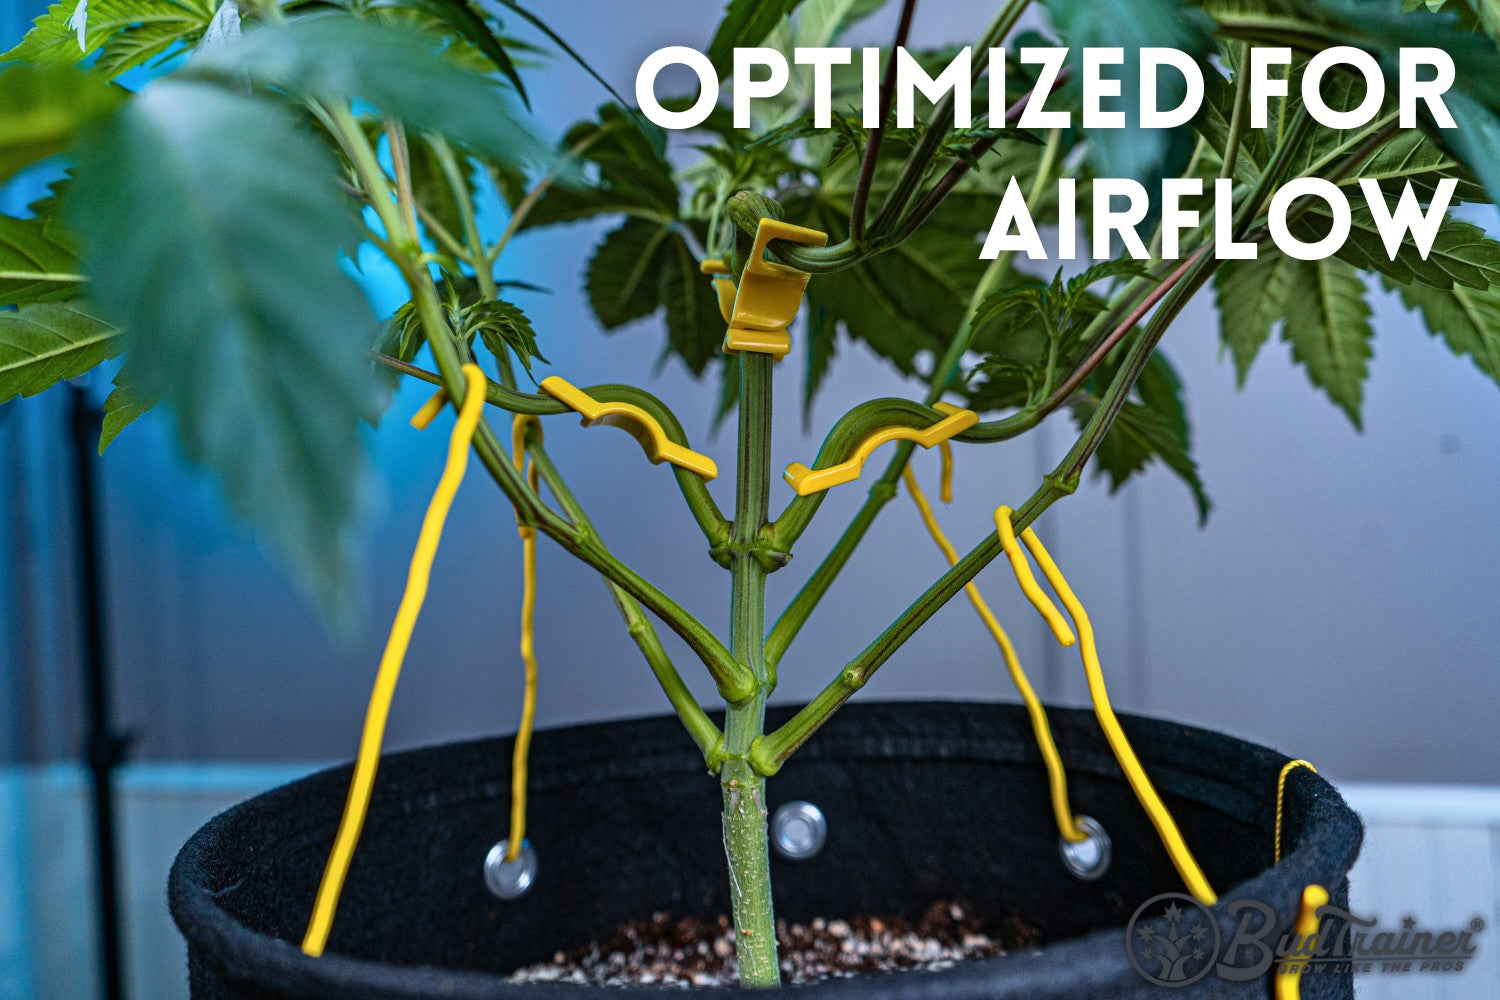 The image shows a cannabis plant being trained using yellow bud clips and wires, with the goal of optimizing airflow around the plant. The main stem is visible, with several branches spread out and held in place by the clips and wires, creating a more open structure to allow better air circulation. The text overlay “Optimized for Airflow” emphasizes the purpose of this training technique.